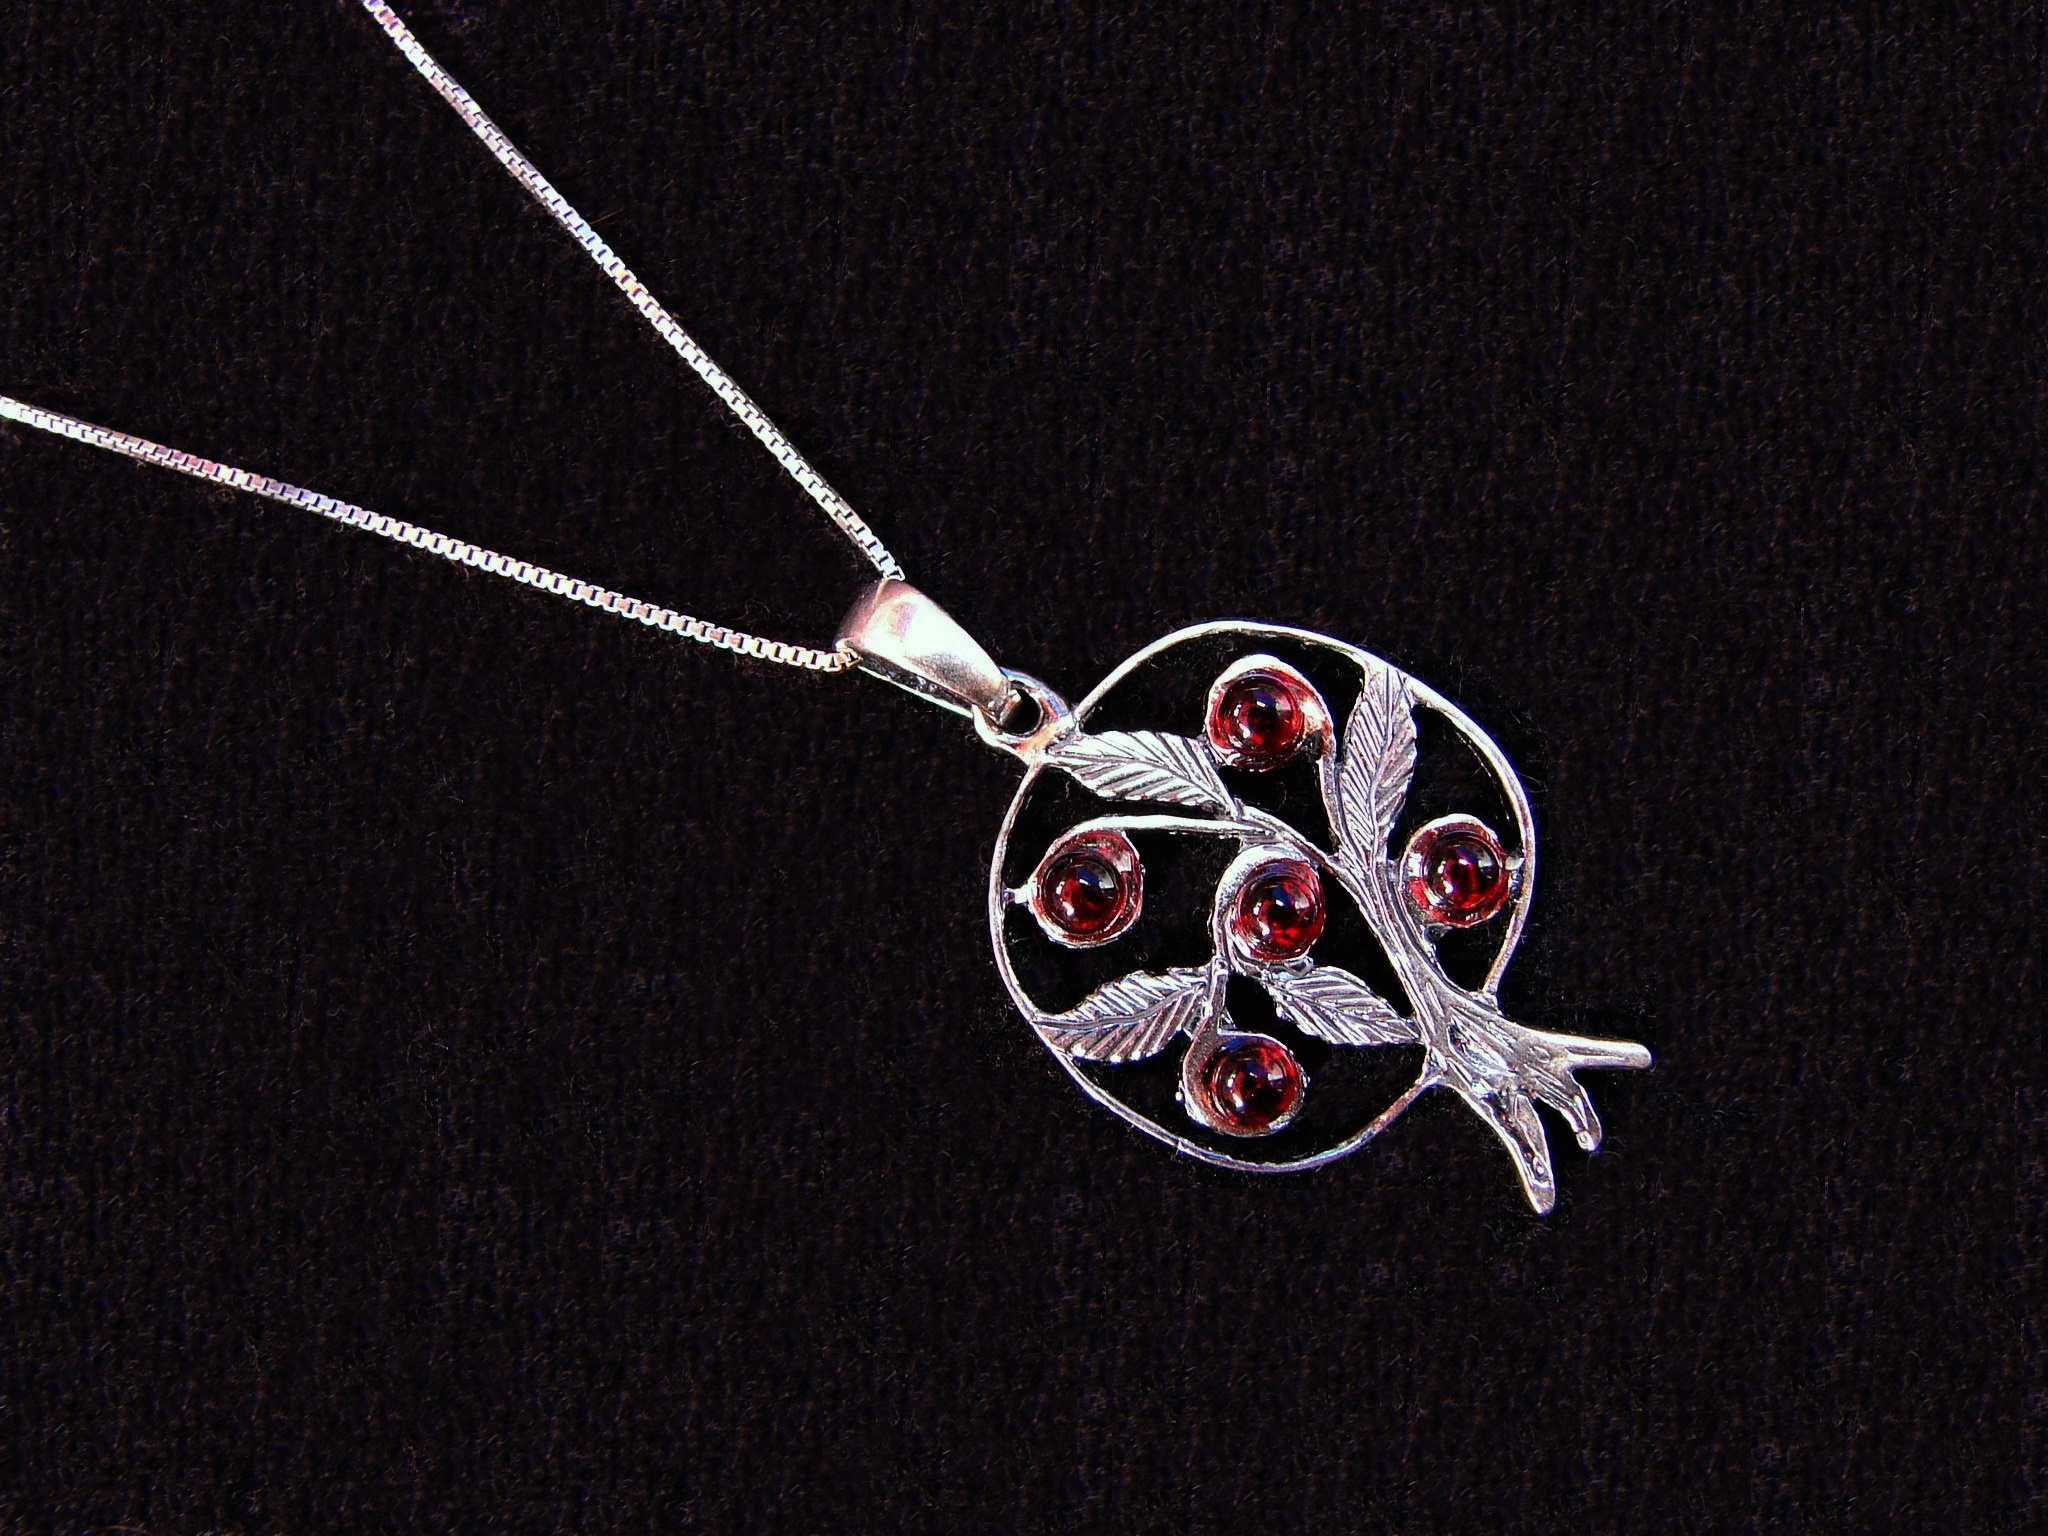 Pendant Pomegranate with Leaves Sterling Silver 925